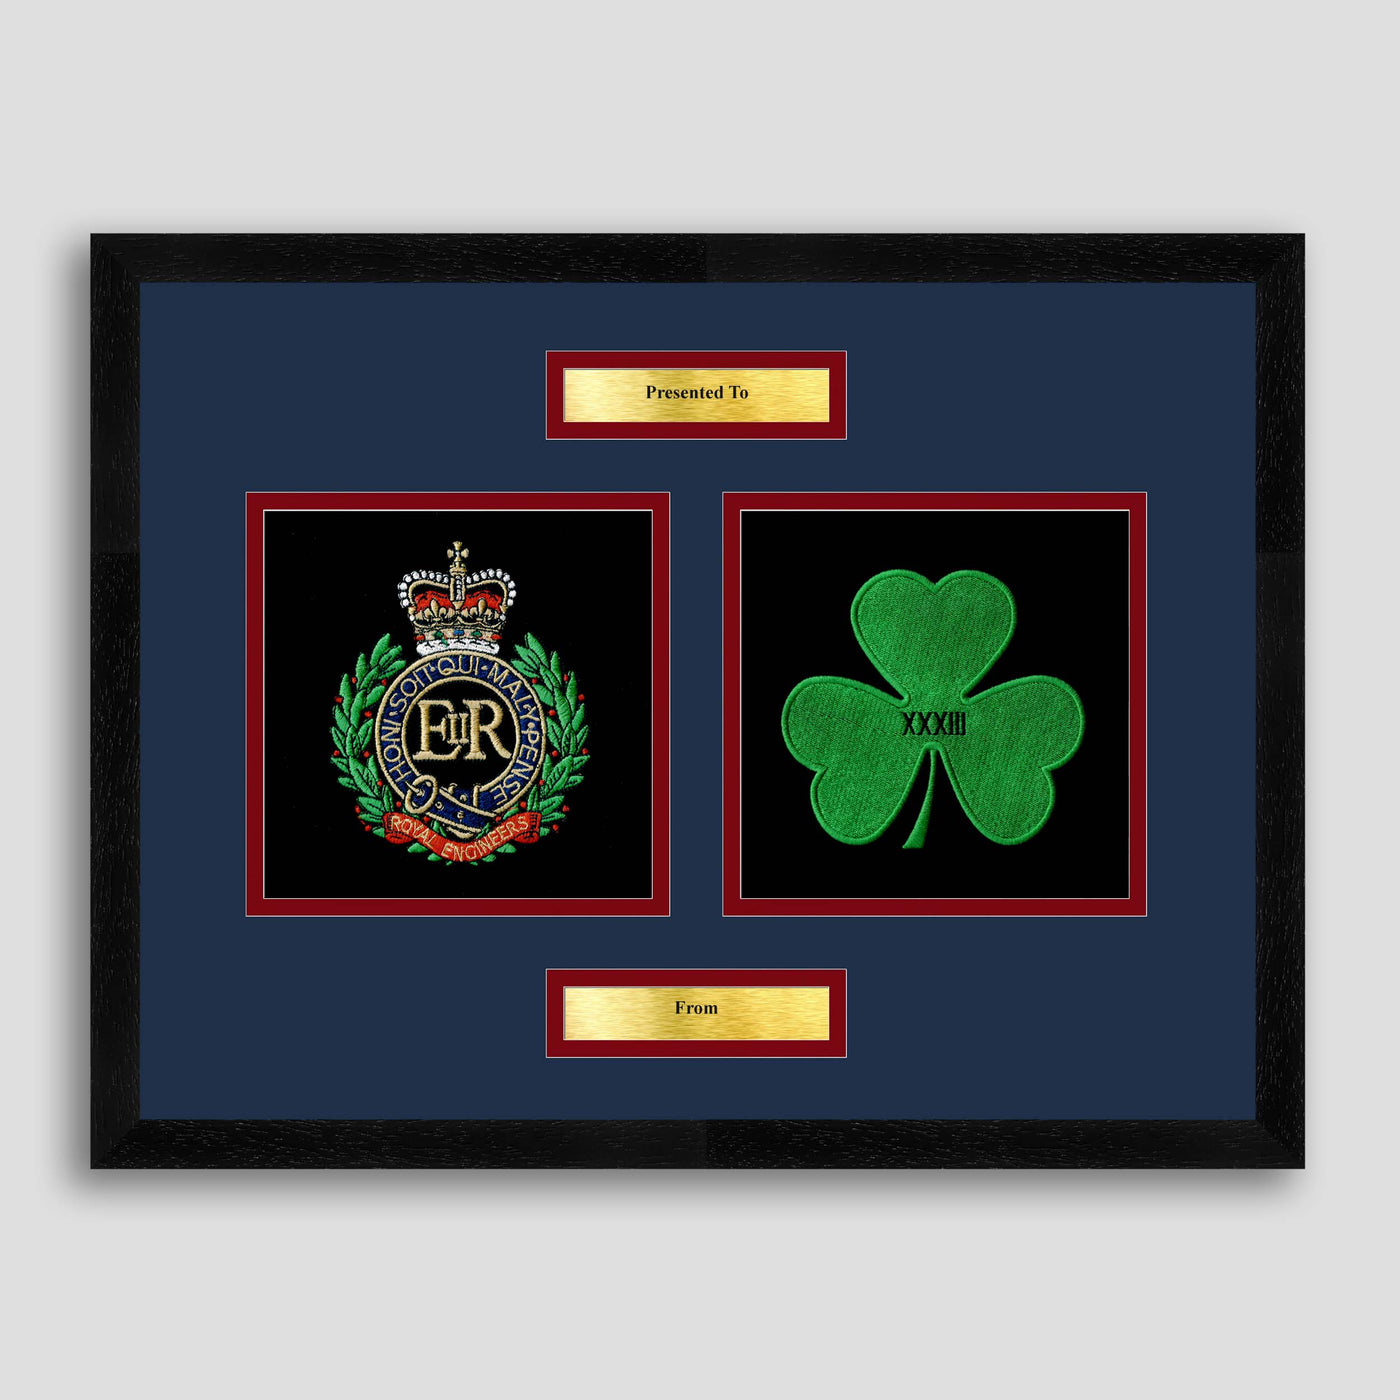 Royal Engineers & 33 Armoured Engineer Squadron Framed Military Embroidery Presentation